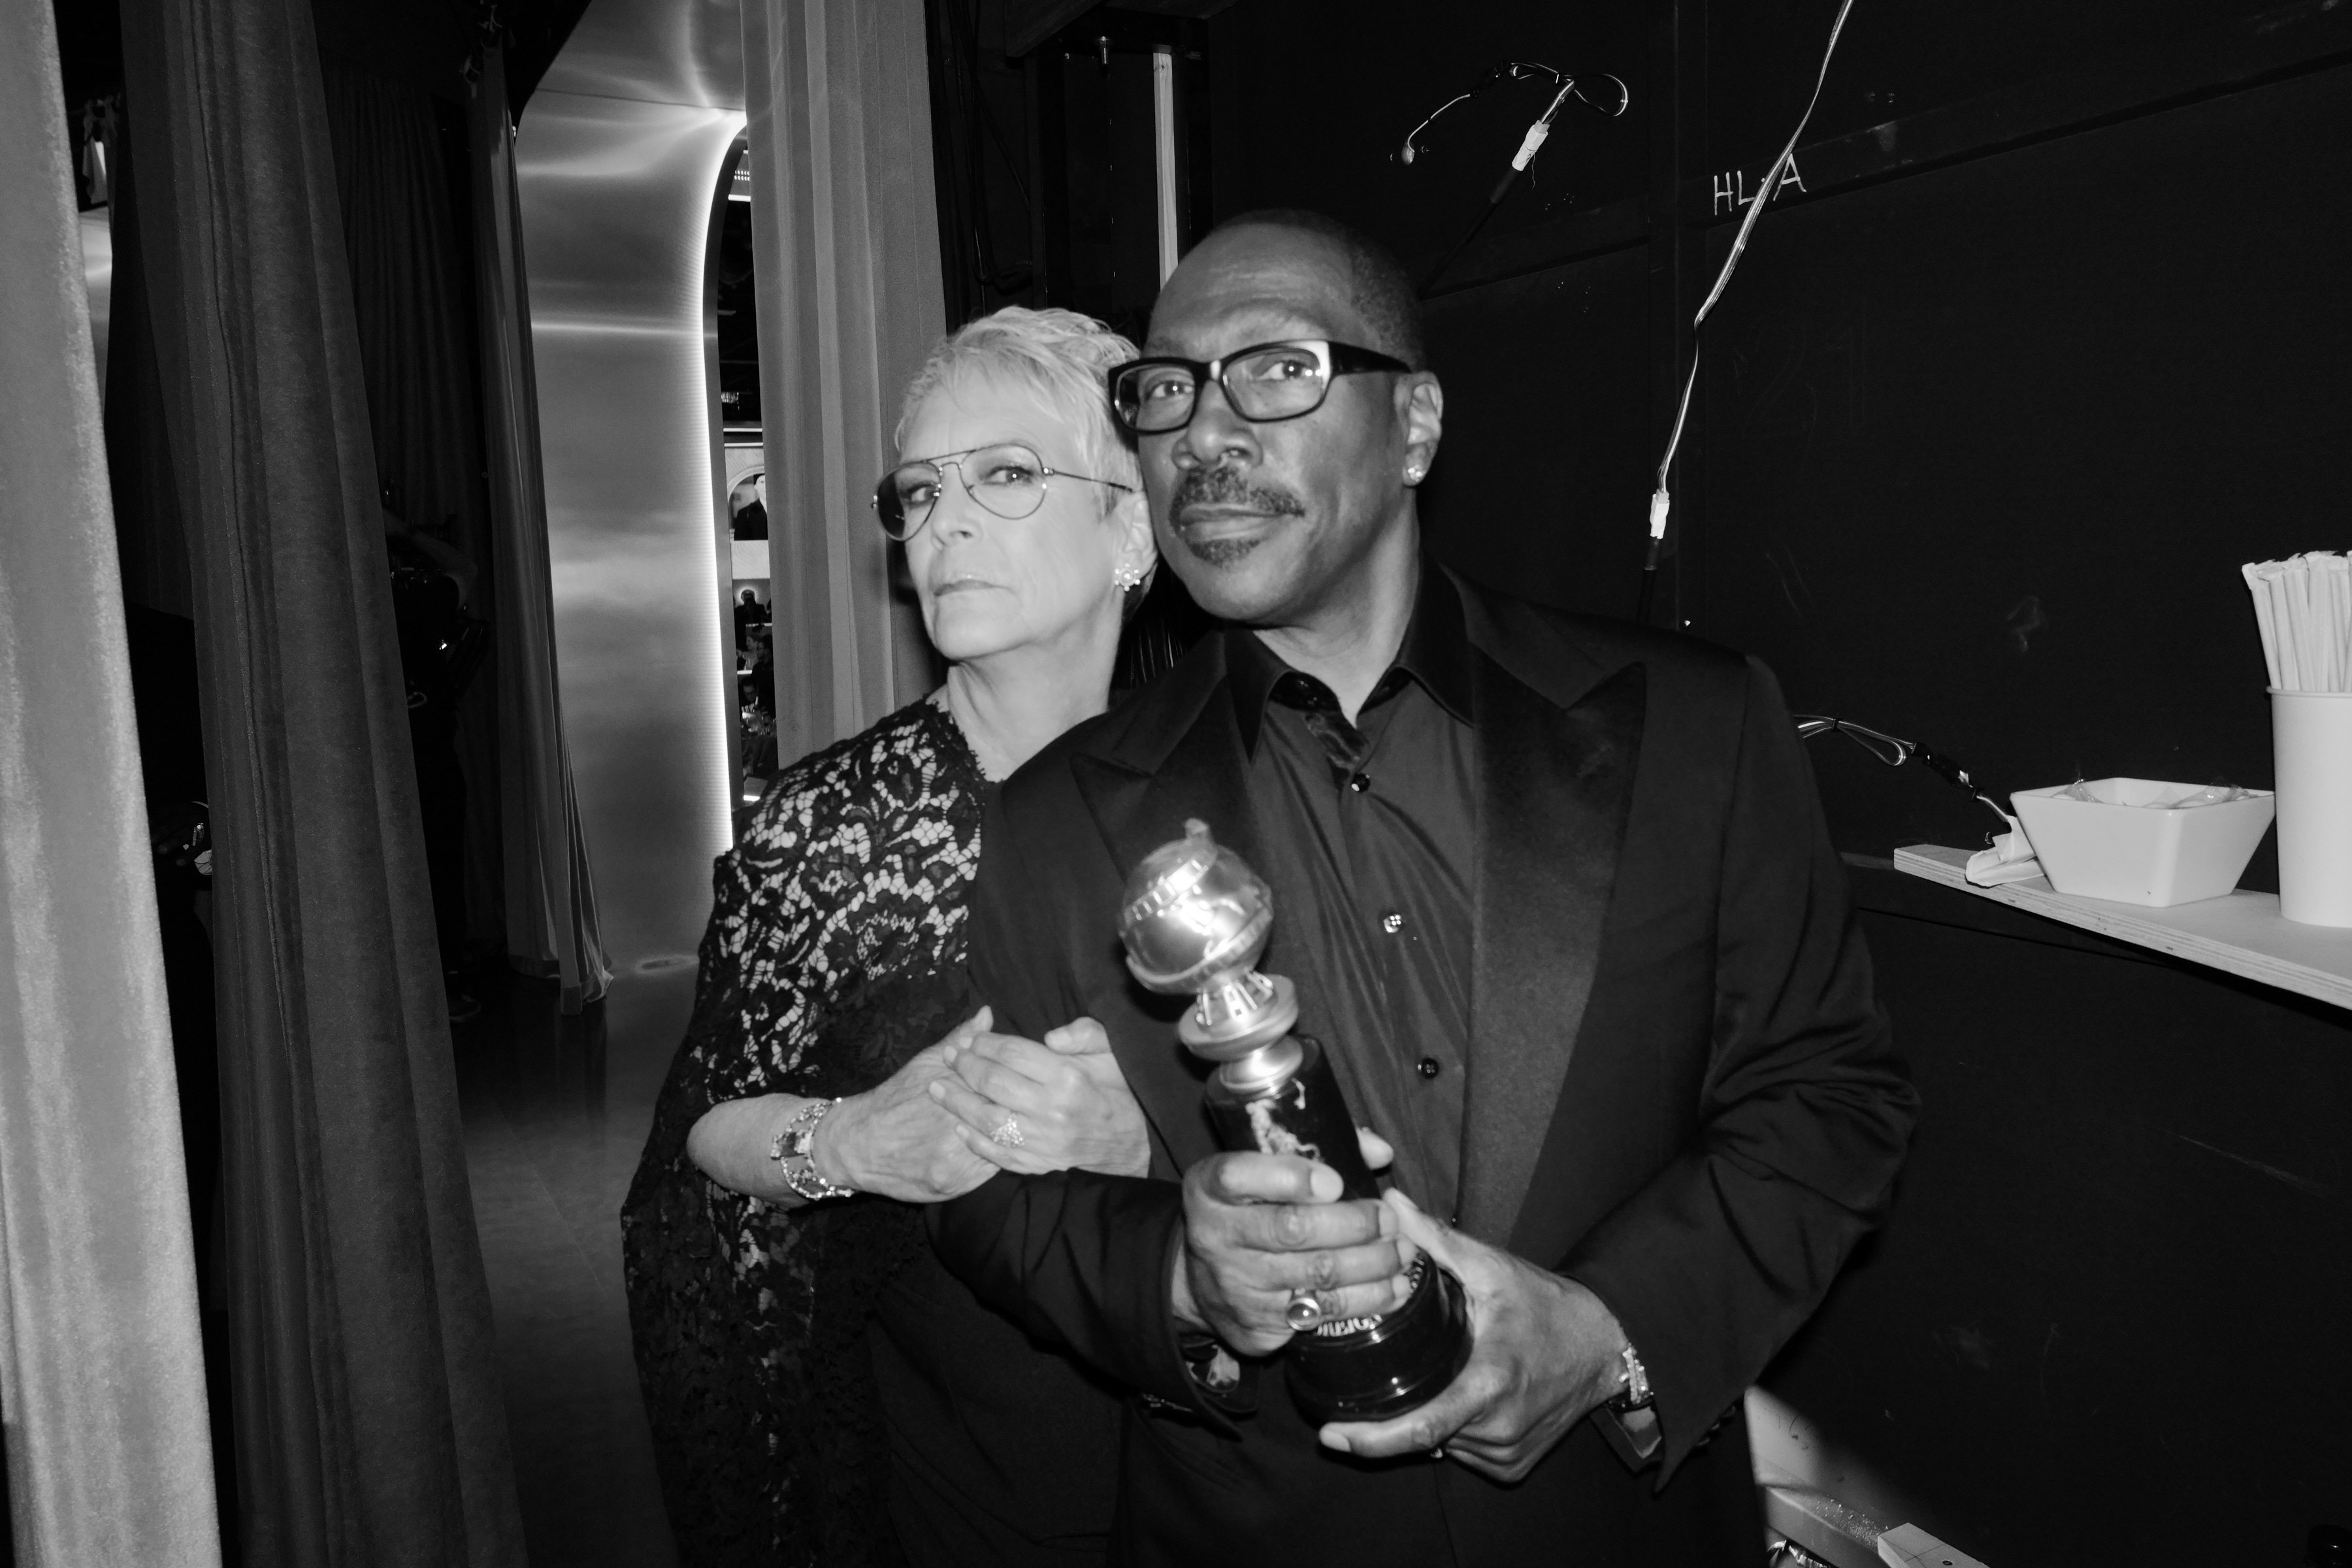 Golden Globe Awards on X: "POV: you're behind-the-scenes at the  #GoldenGlobes with Hollywood's biggest stars ???? ???? Greg Williams  https://t.co/KDWrIVVMR3" / X